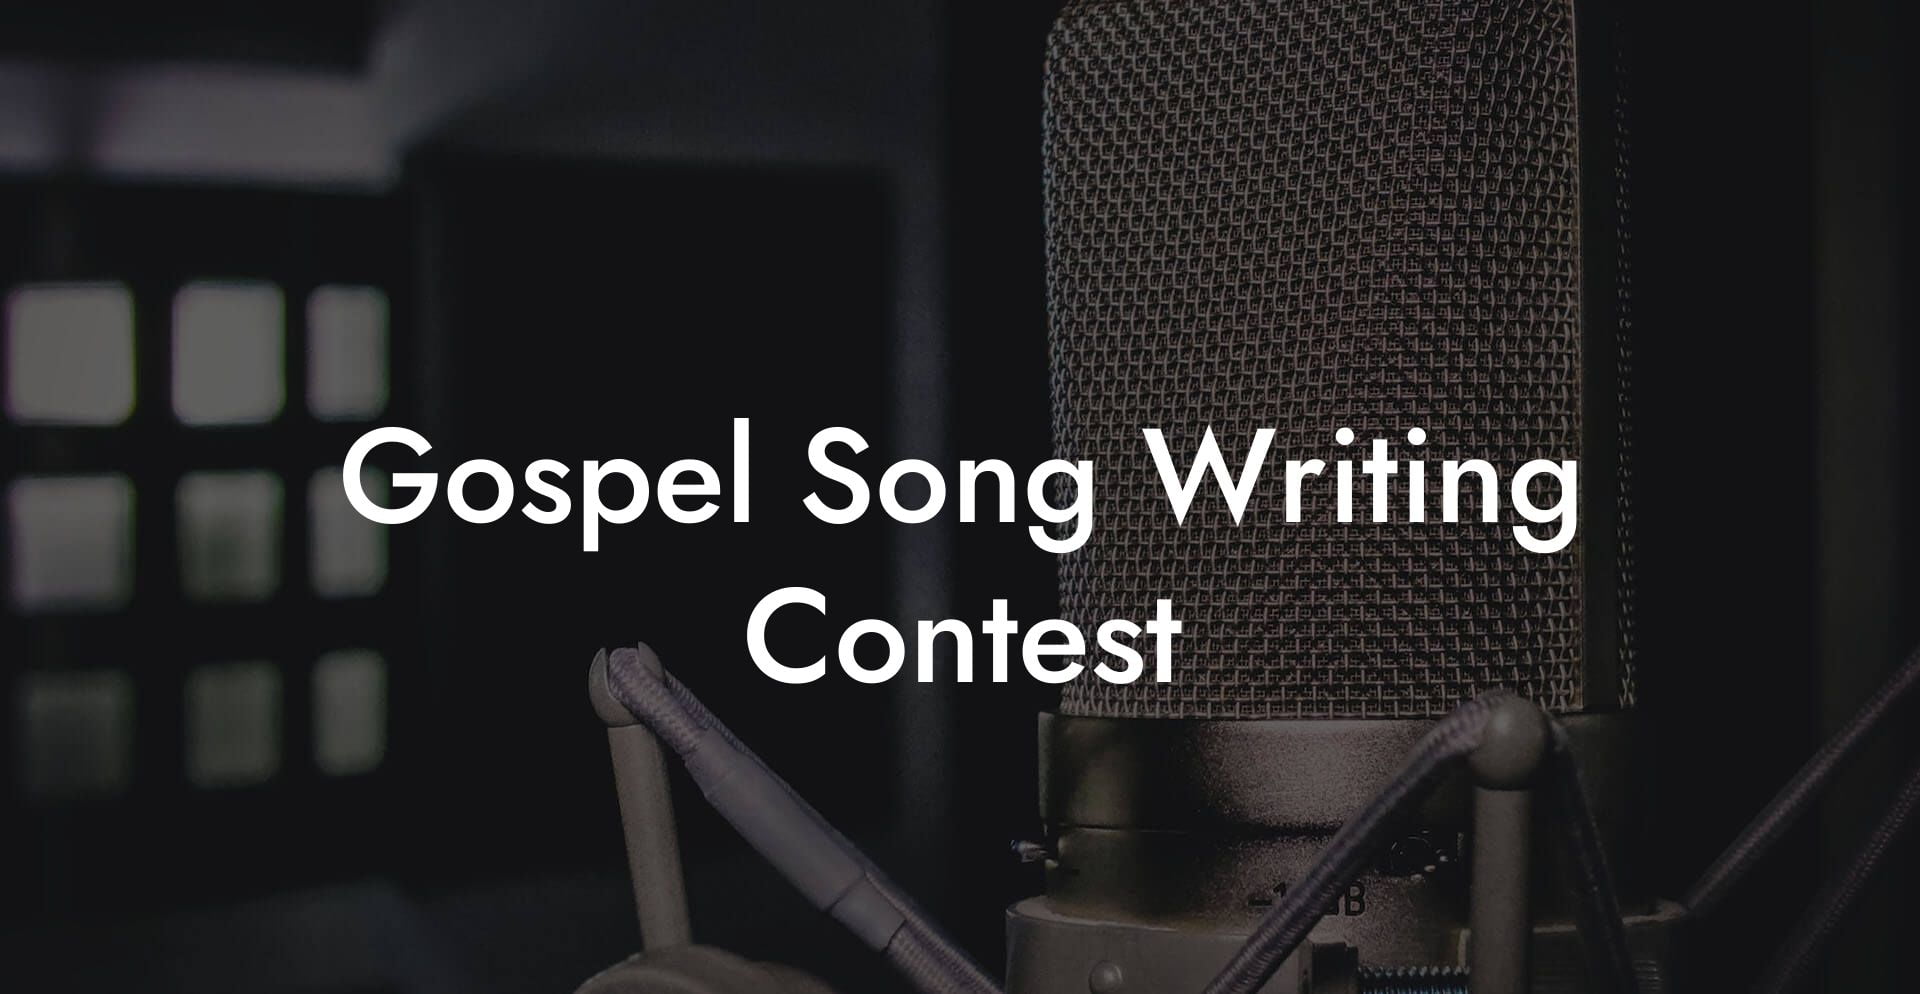 gospel song writing contest lyric assistant